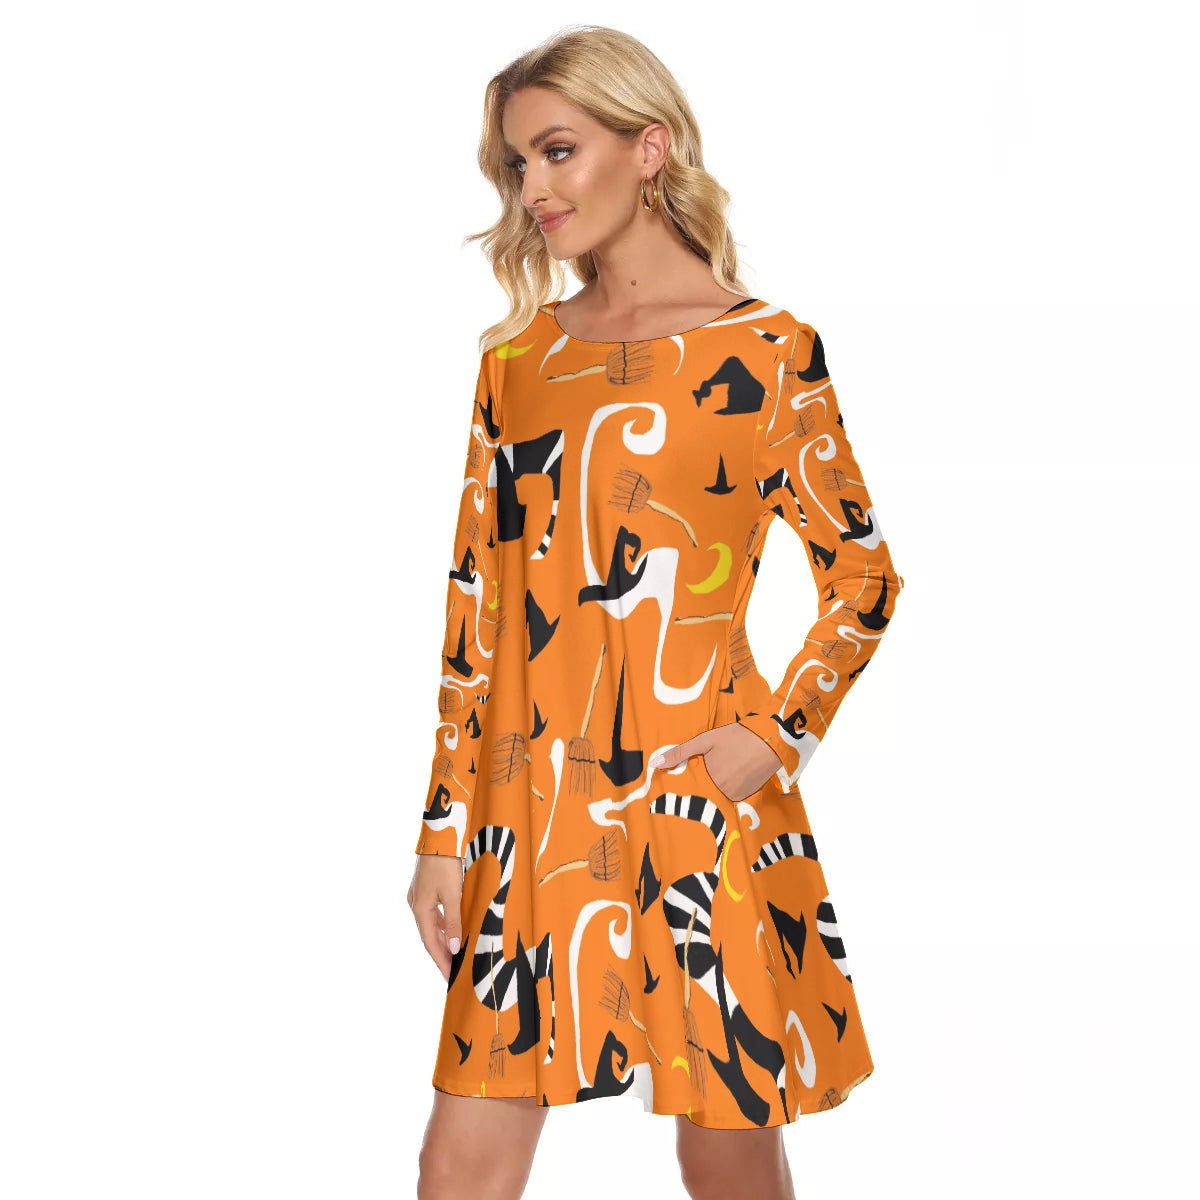 Witches Hats and Brooms All-Over Print Women's Crew Neck Dress